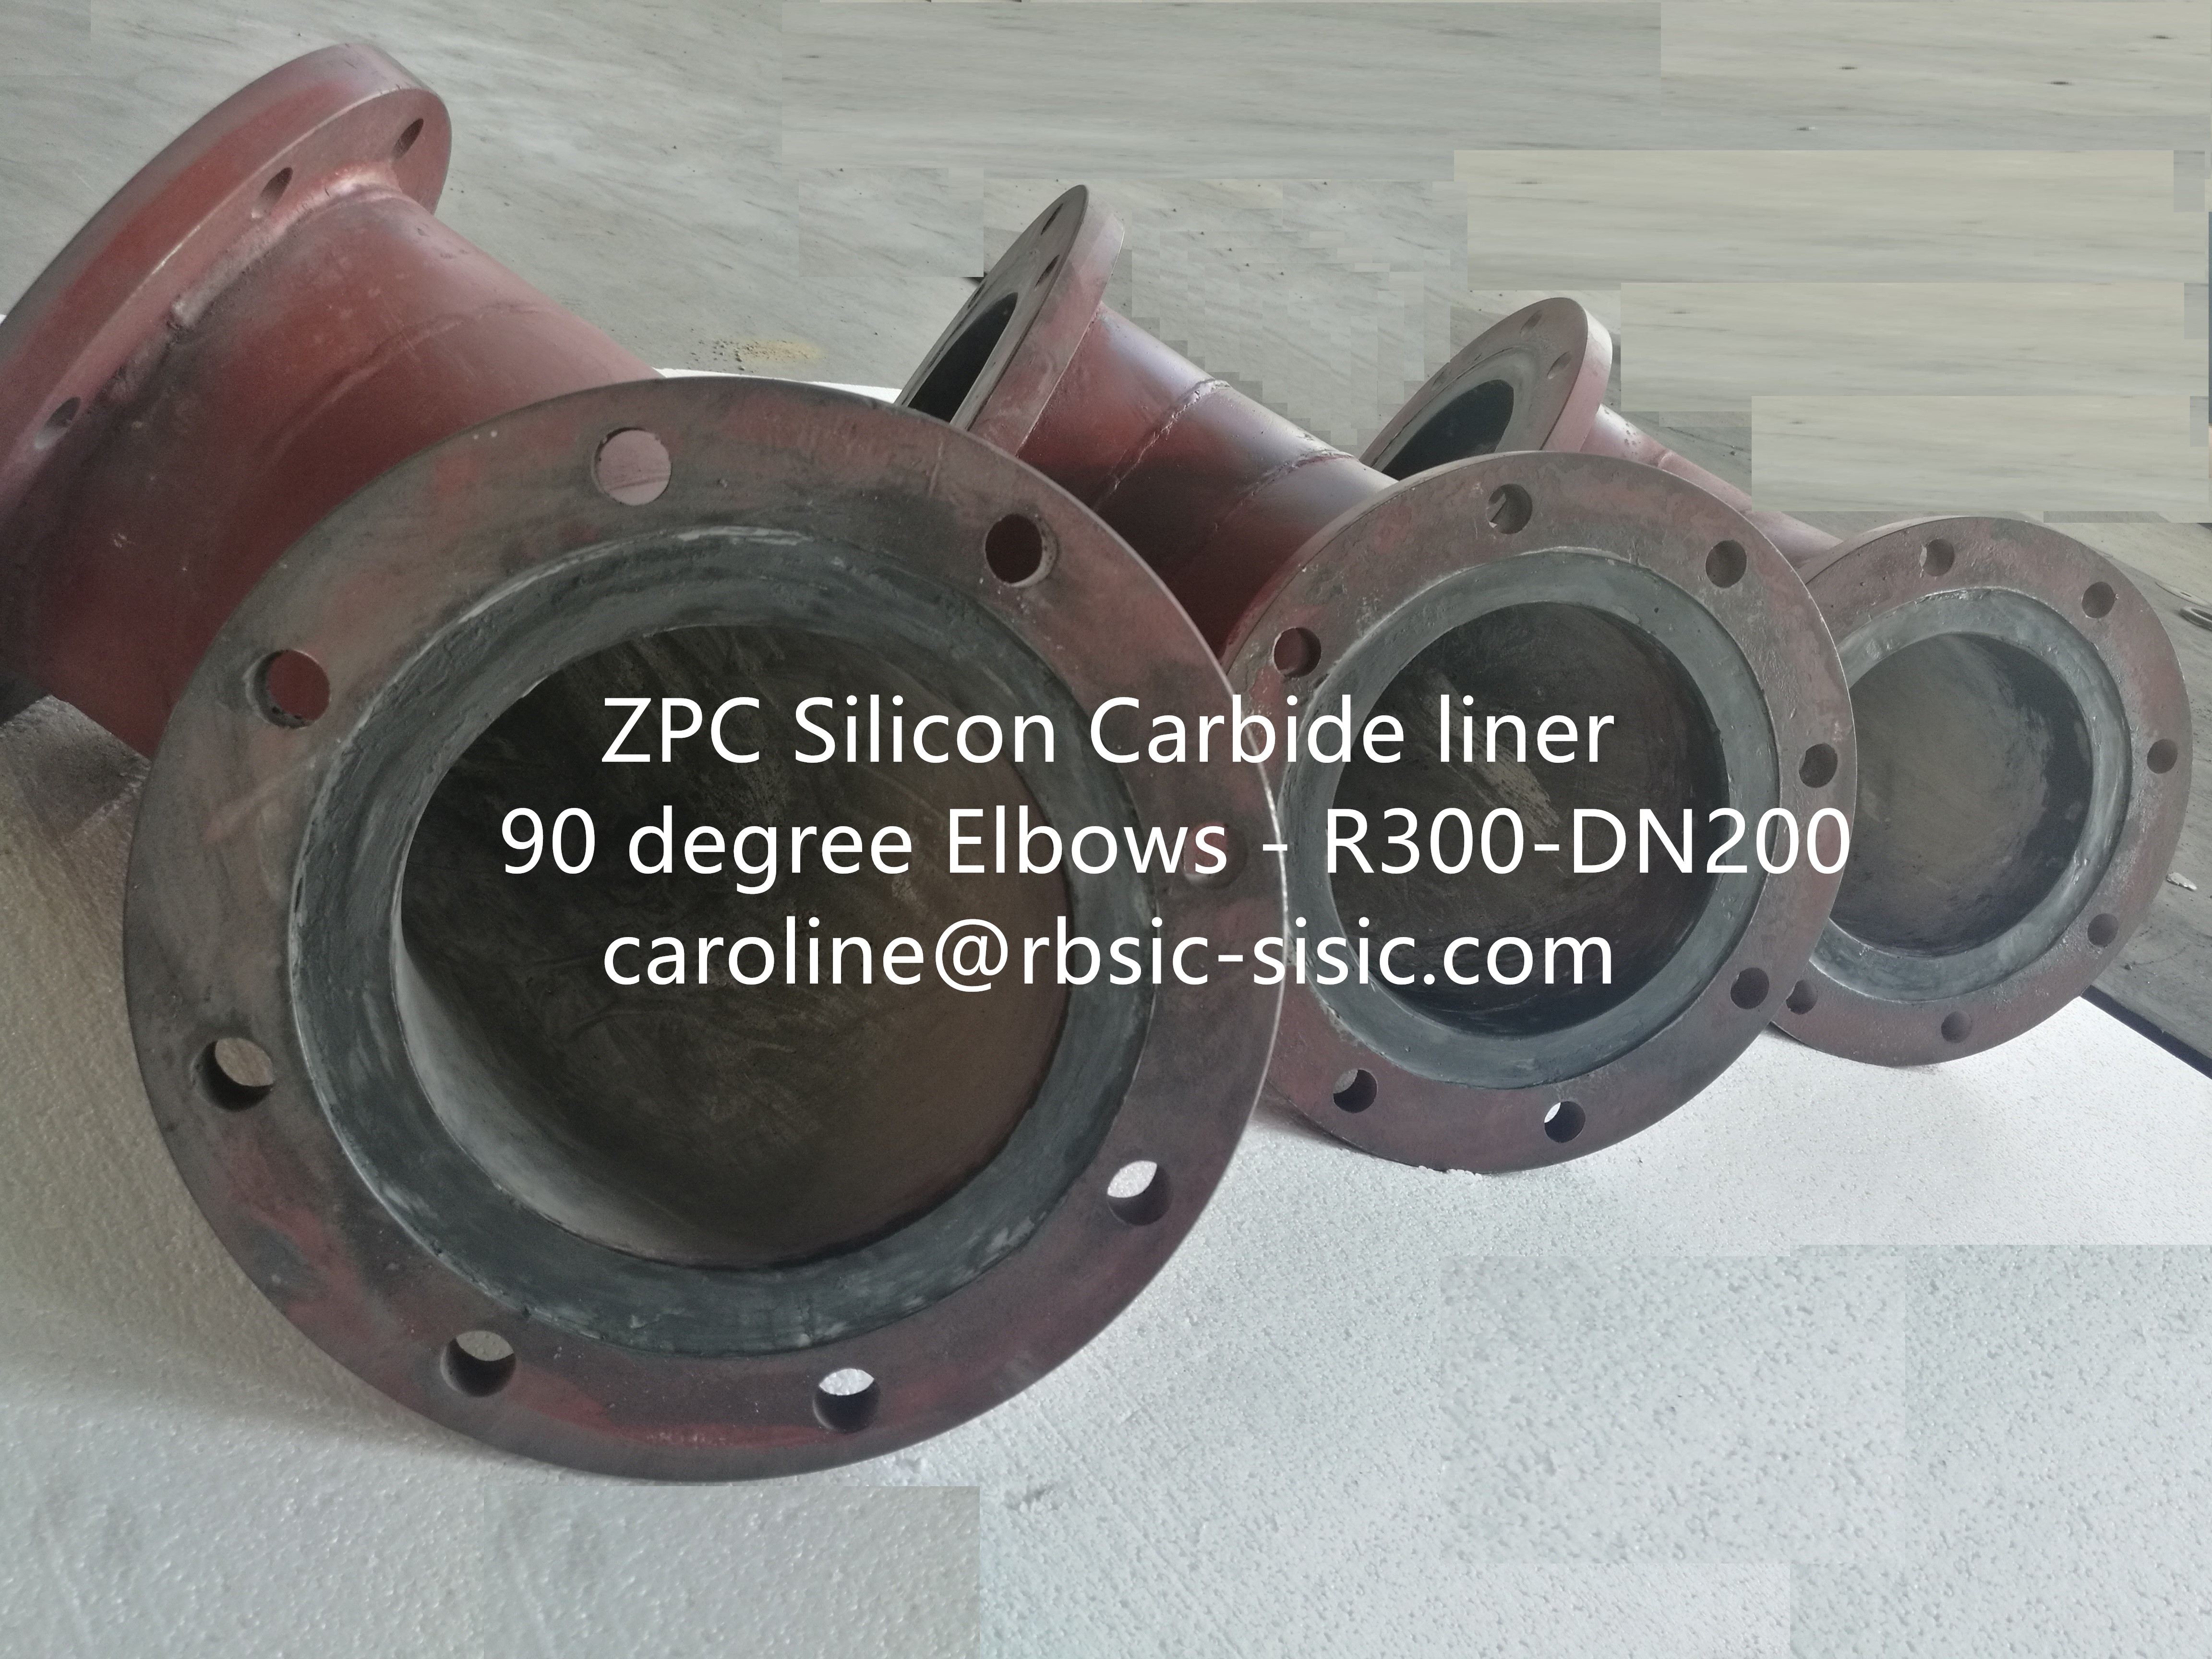 Ceramic-lined Pipe - Silicon carbide lined pipe, elbow, cone, spigot